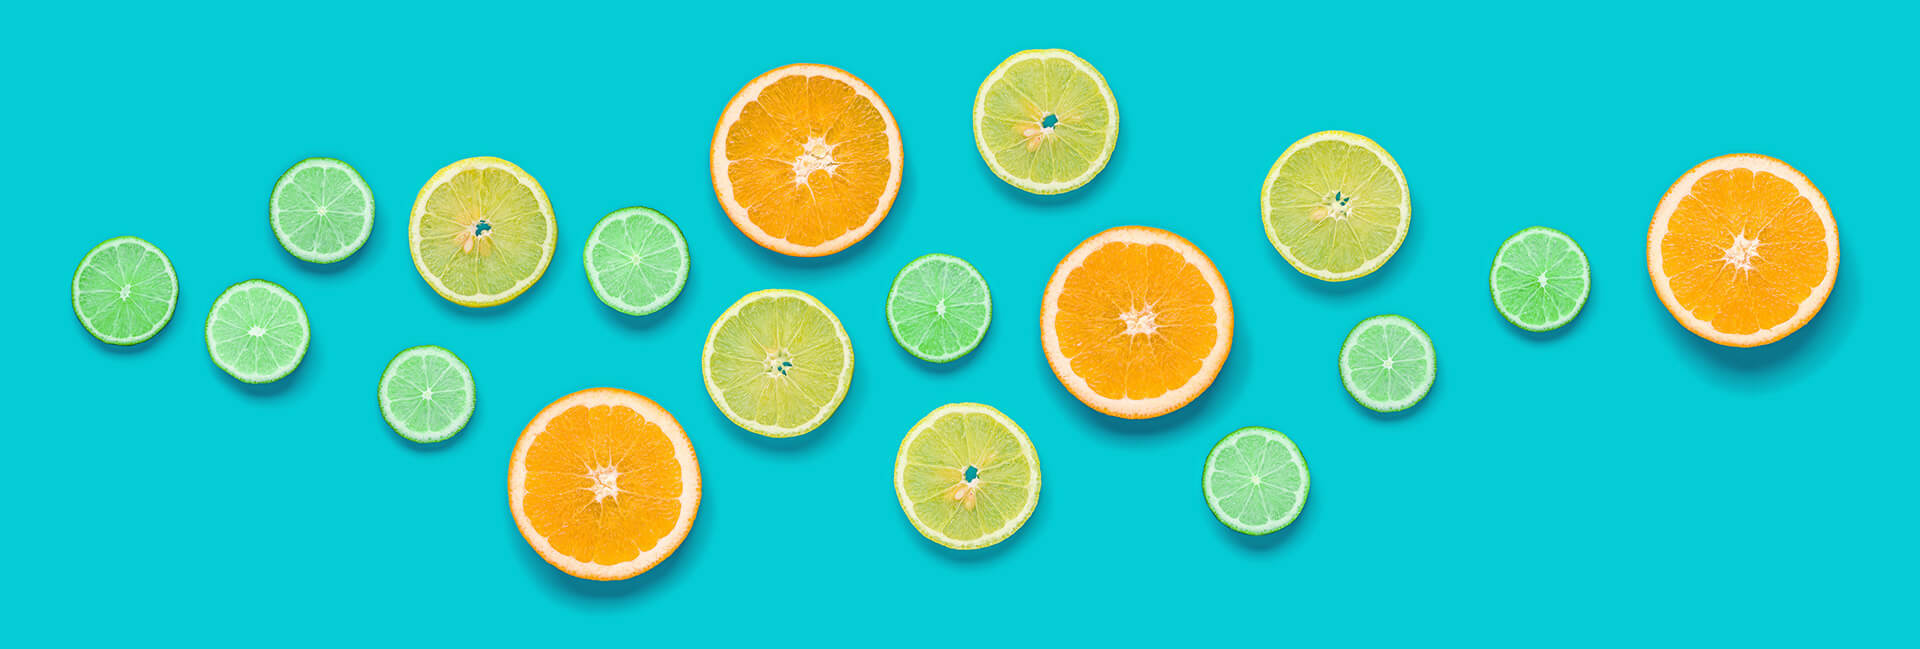 Citrus fruits against a blue-green background